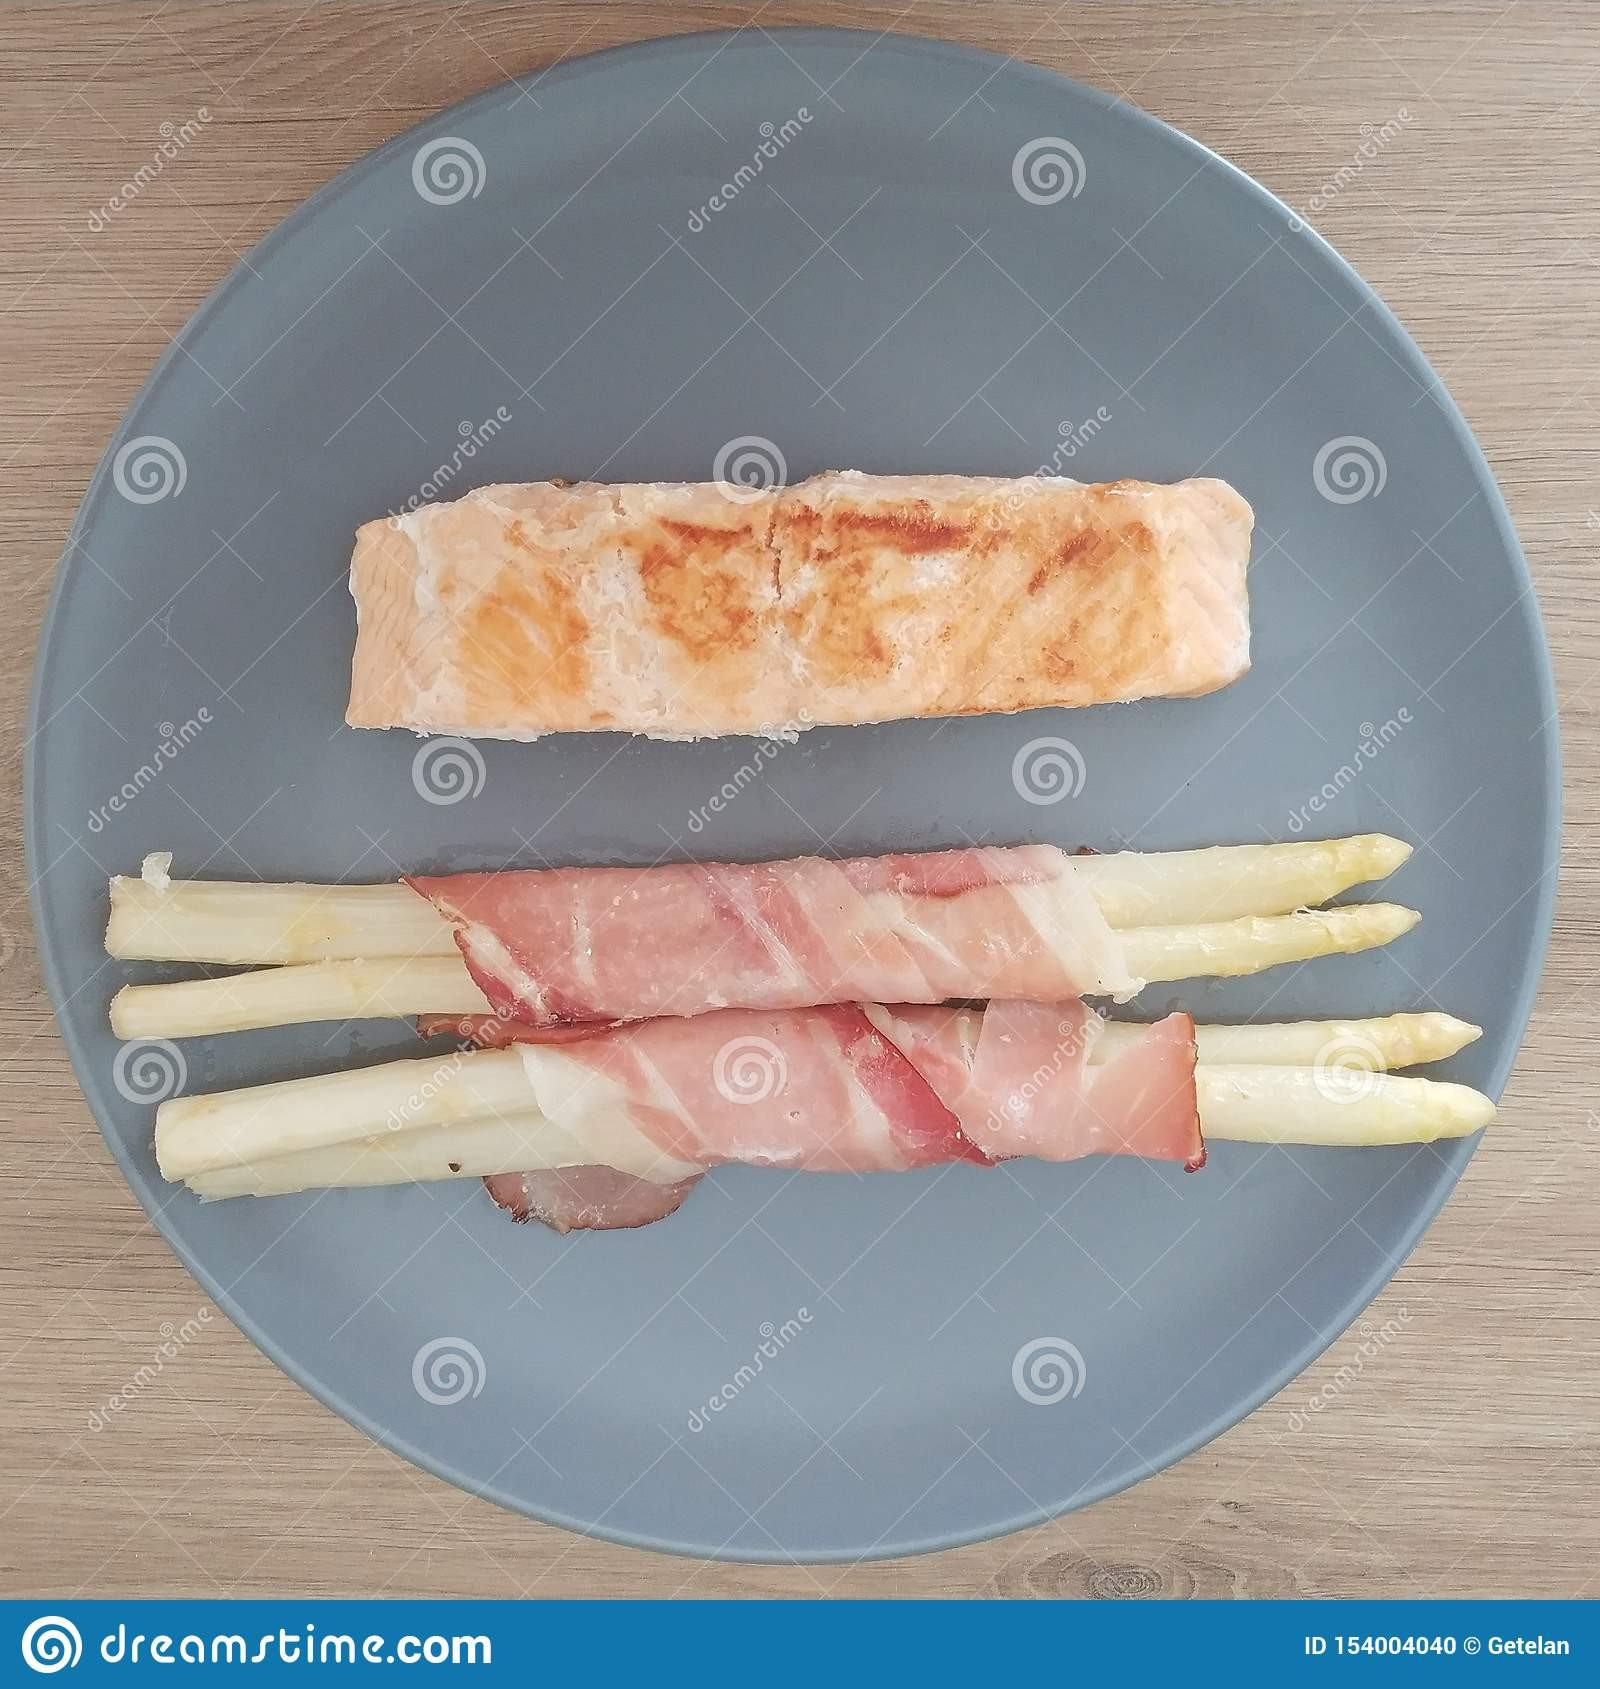 Bacon Wrapped Salmon Keto
 Ketogenic Meal Salmon Fish With Bacon Wrapped White